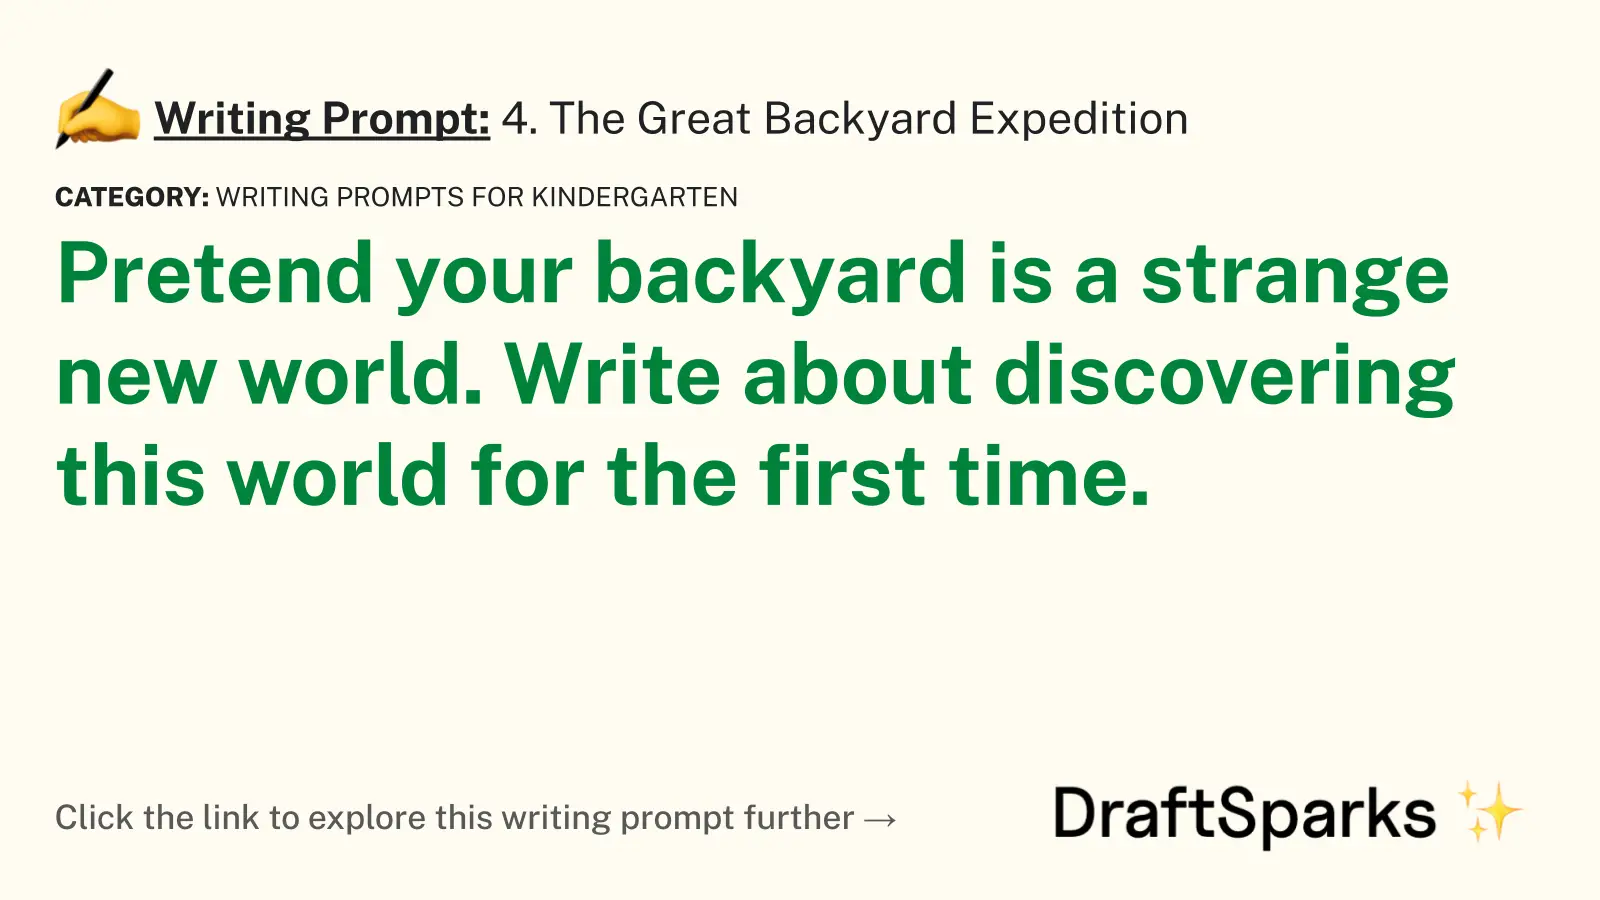 4. The Great Backyard Expedition